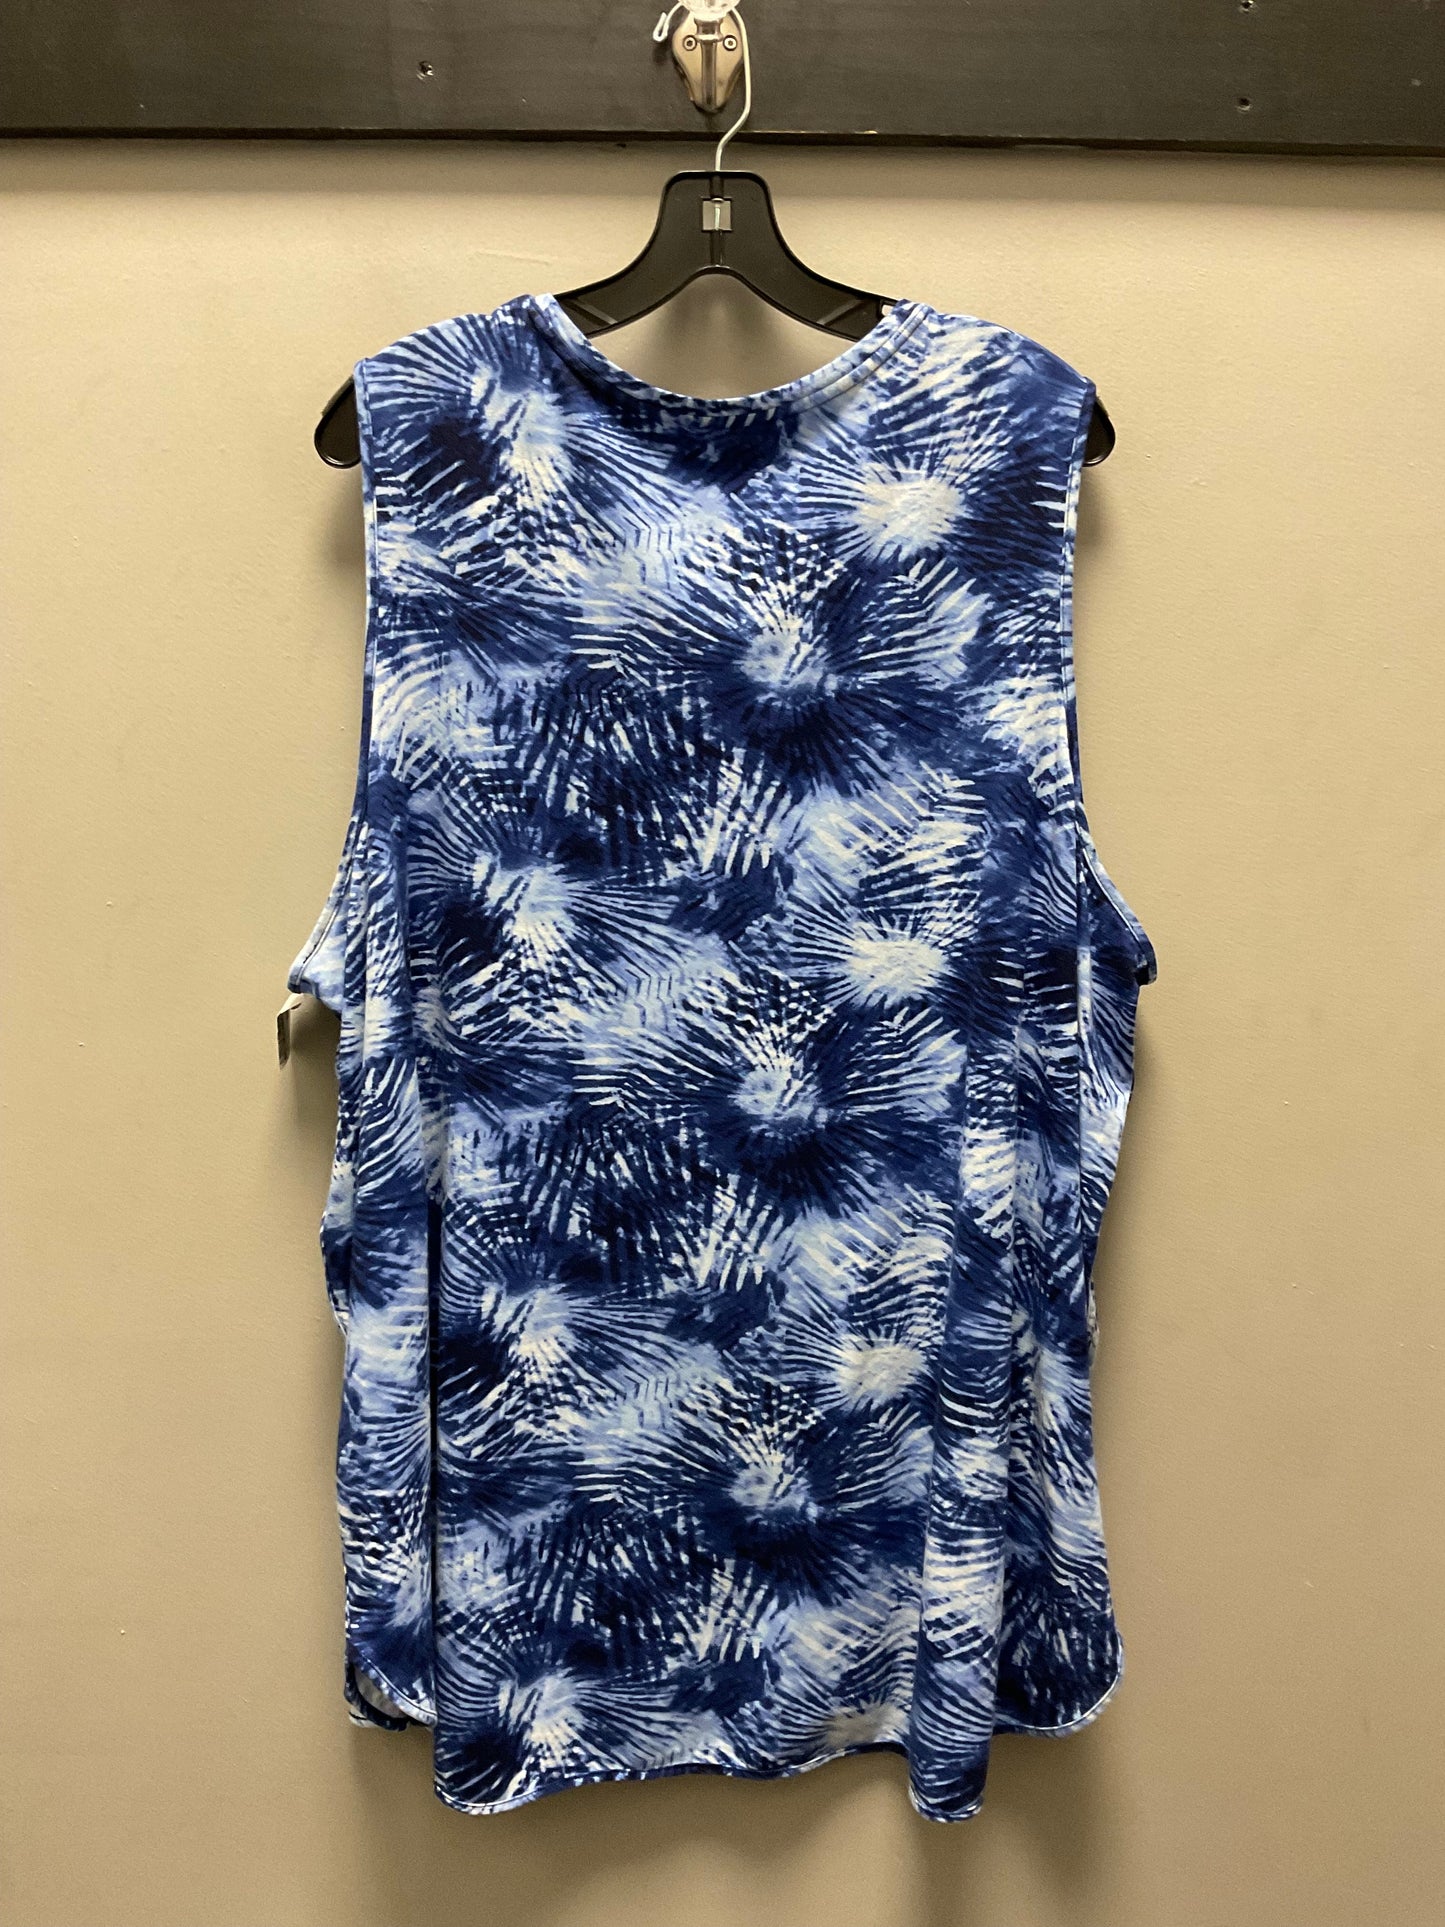 Top Sleeveless By Lands End  Size: 3x